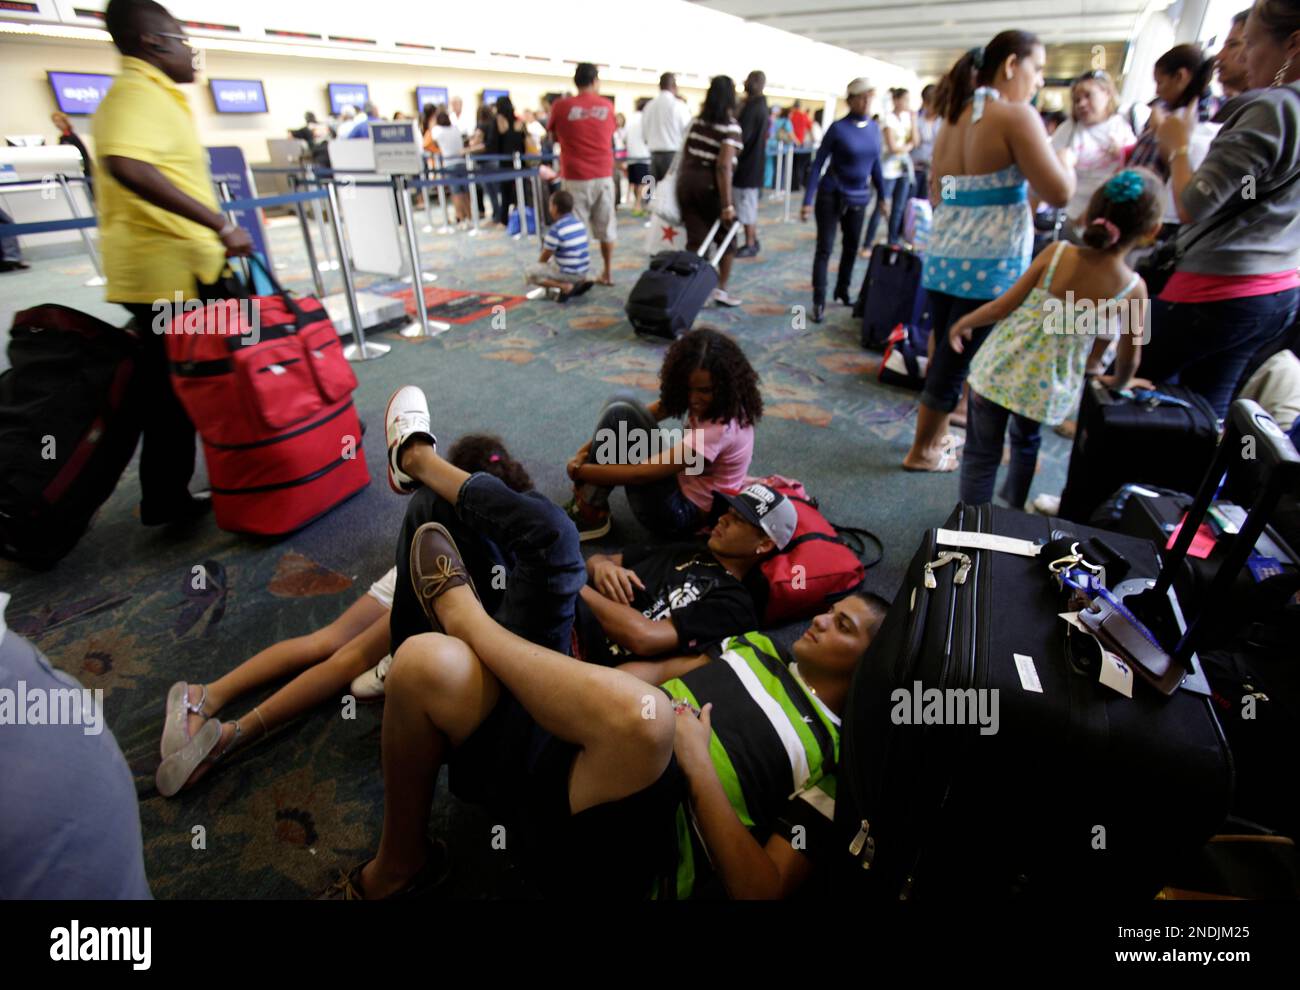 Robert Aviles, right, and Jose Valentin, left, of Puerto Rico, lie on the floor with their luggage at the Fort Lauderdale-Hollywood International Airport in Fort Lauderdale, Fla. Sunday, June 13, 2010. Spirit Airlines canceled all of its flights through Tuesday, stranding thousands of passengers as the pilot's strike continues into its second day. (AP Photo/Lynne Sladky) Stock Photo